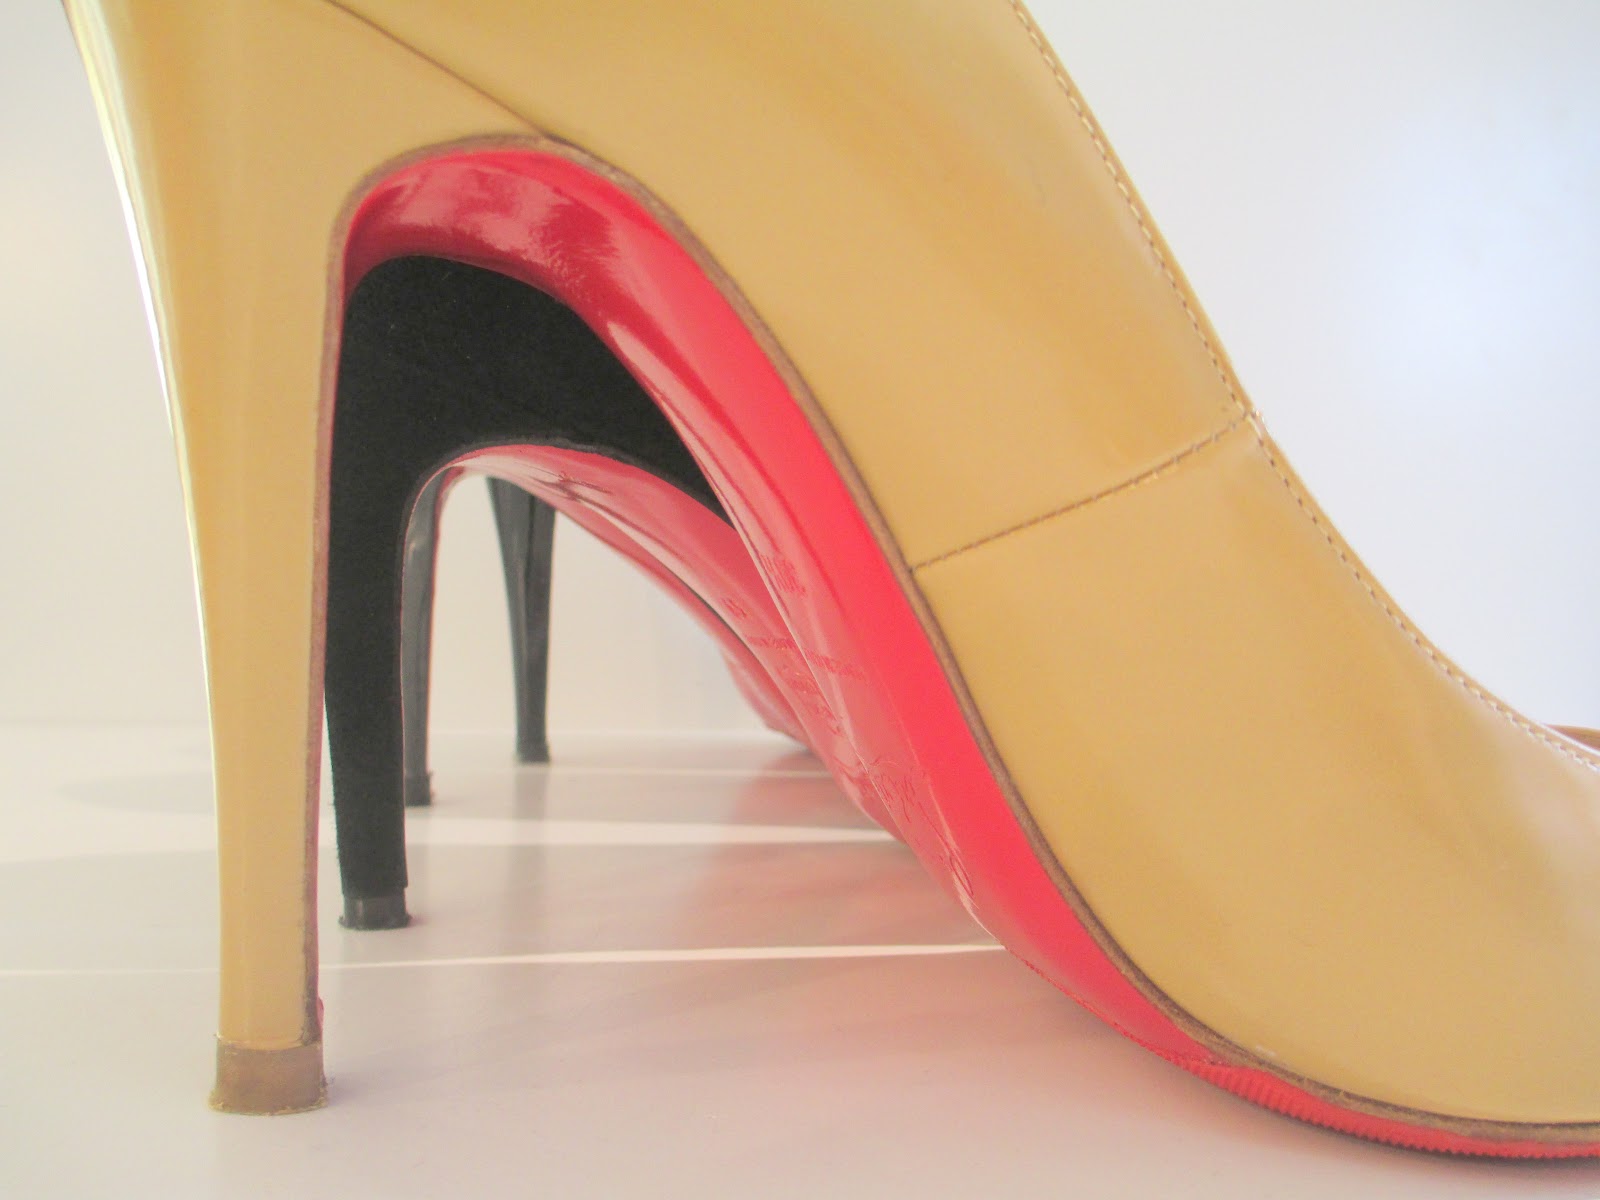 Vancouver Luxury Designer Consignment Shop: Shop Authentic Christian Louboutin shoes on consignment